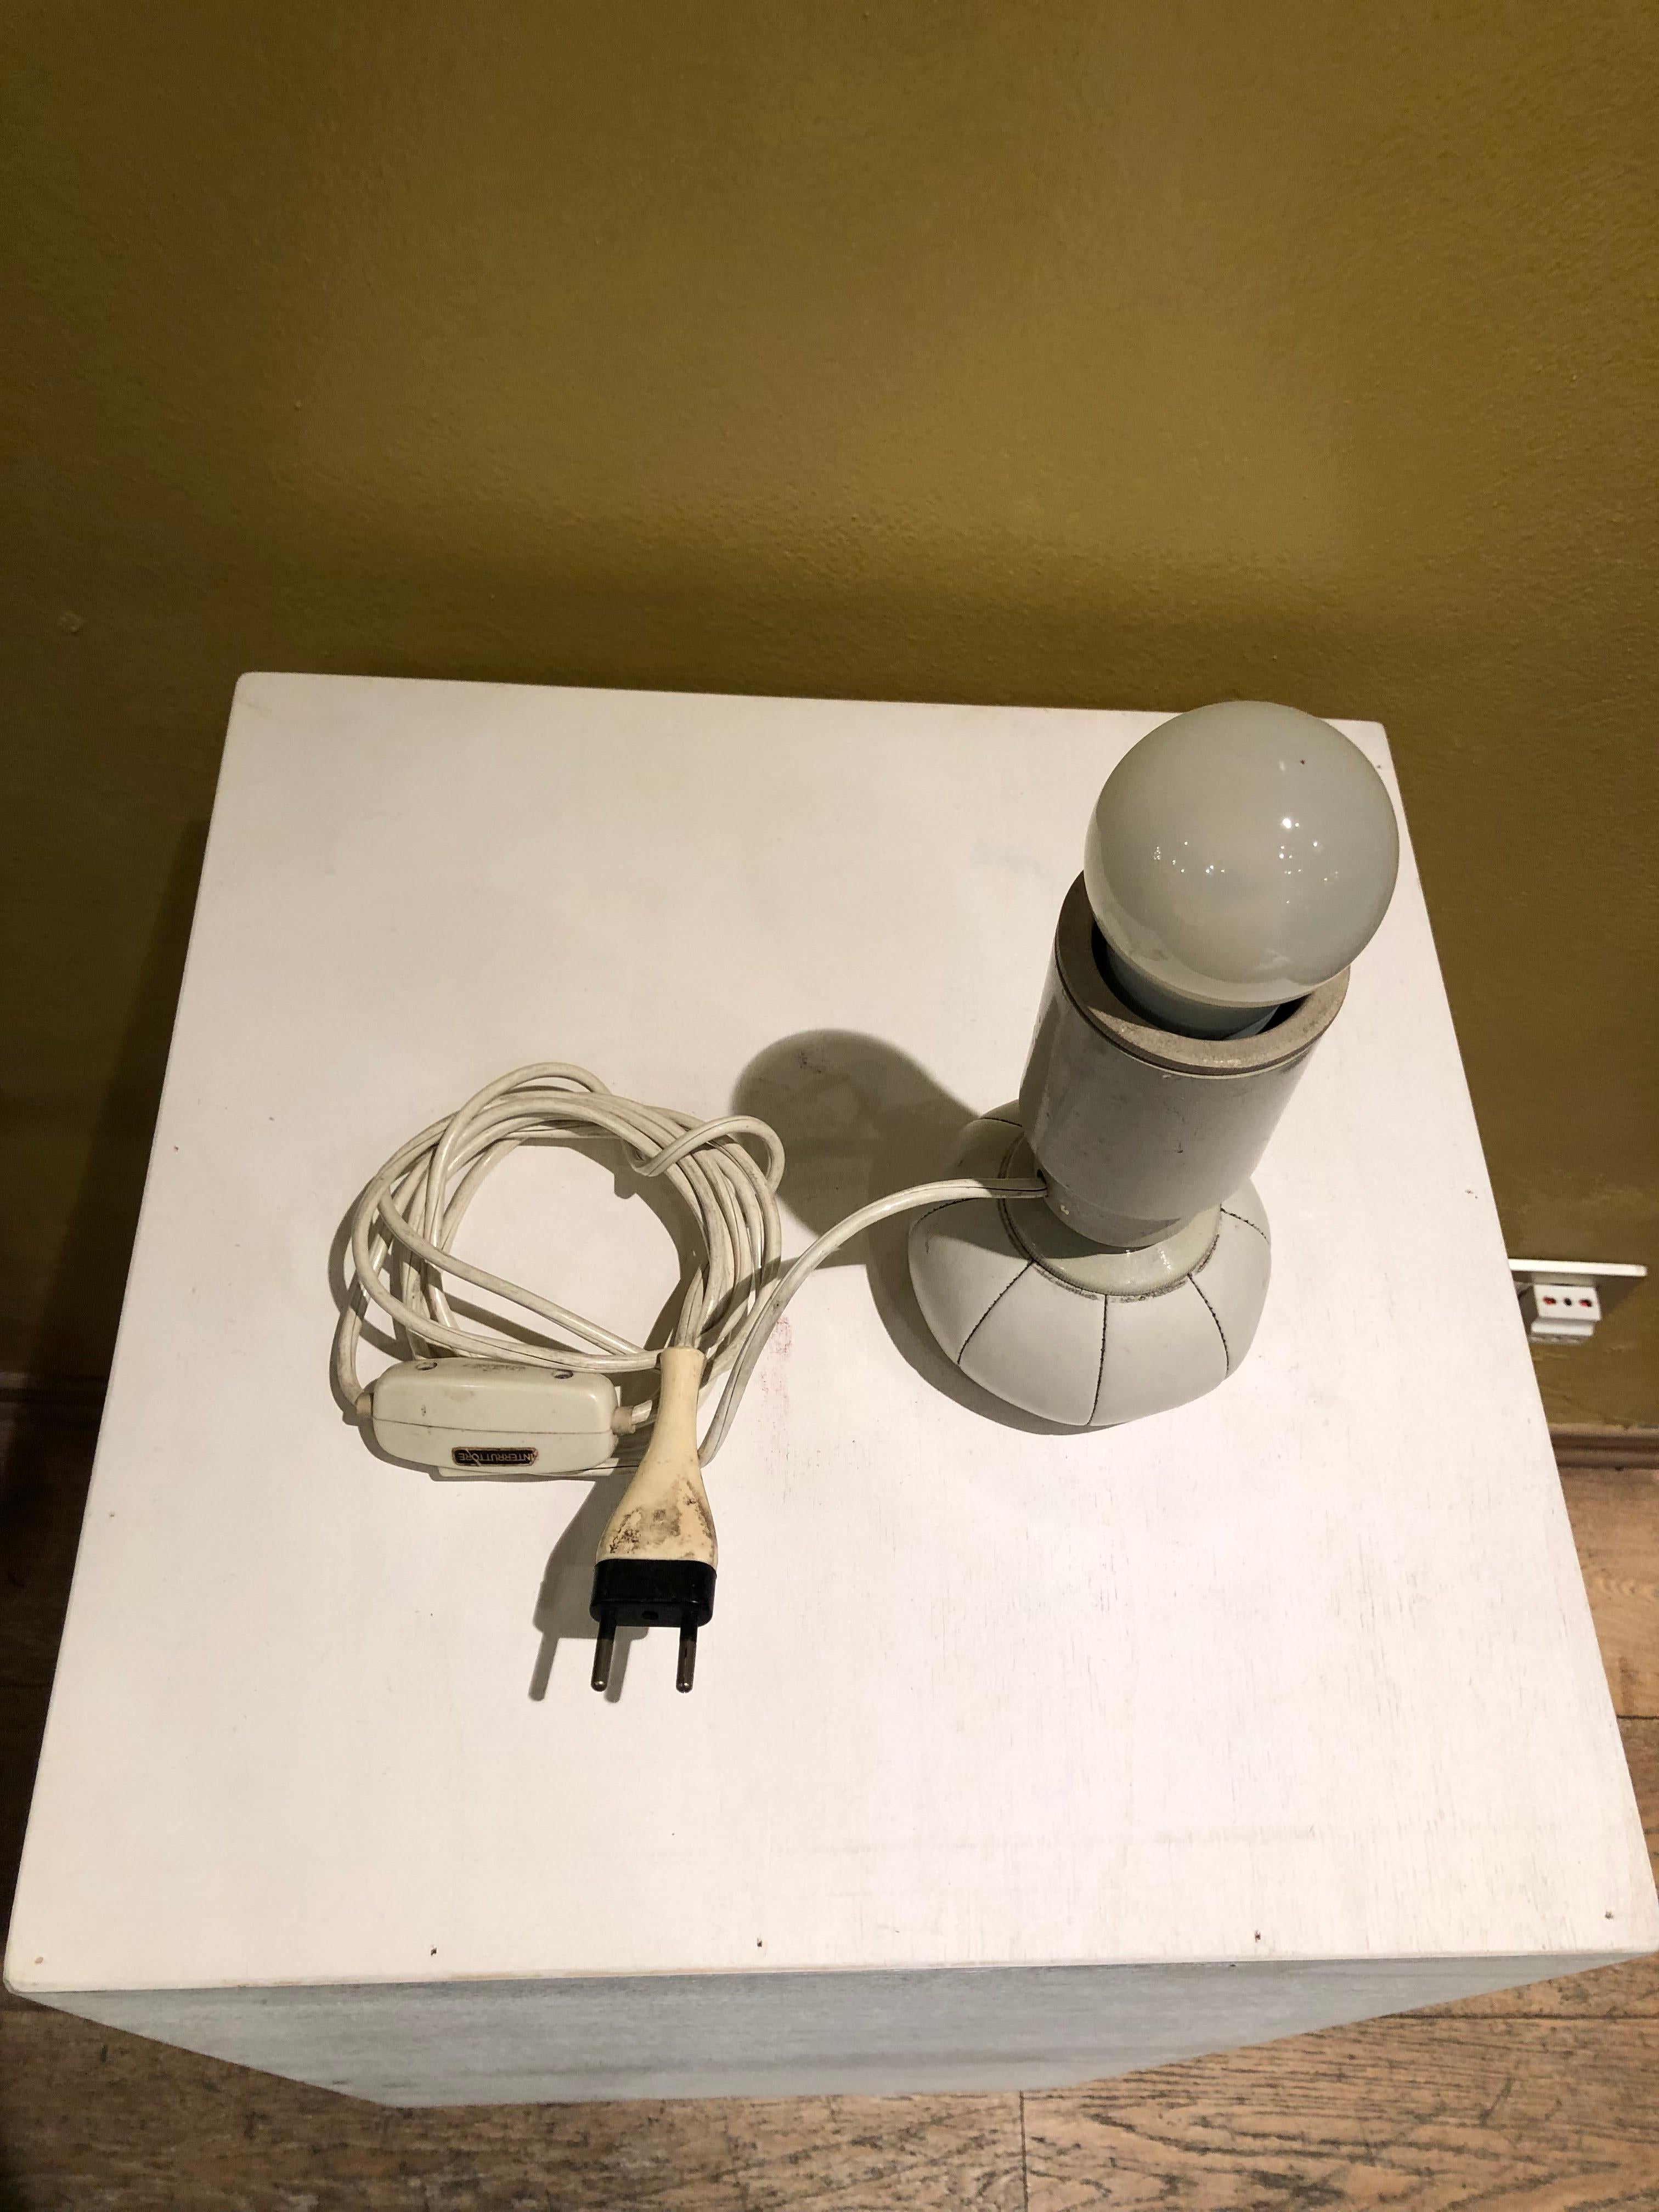 White table lamp model 600/c, designed in 1966 by Gino Sarfatti for Arteluce, Italy. 

Plug Type European Plug (up to 250V)
Measures: Height 9.4 inch / 24 cm
Diameter 3.9 inch / 10 cm.